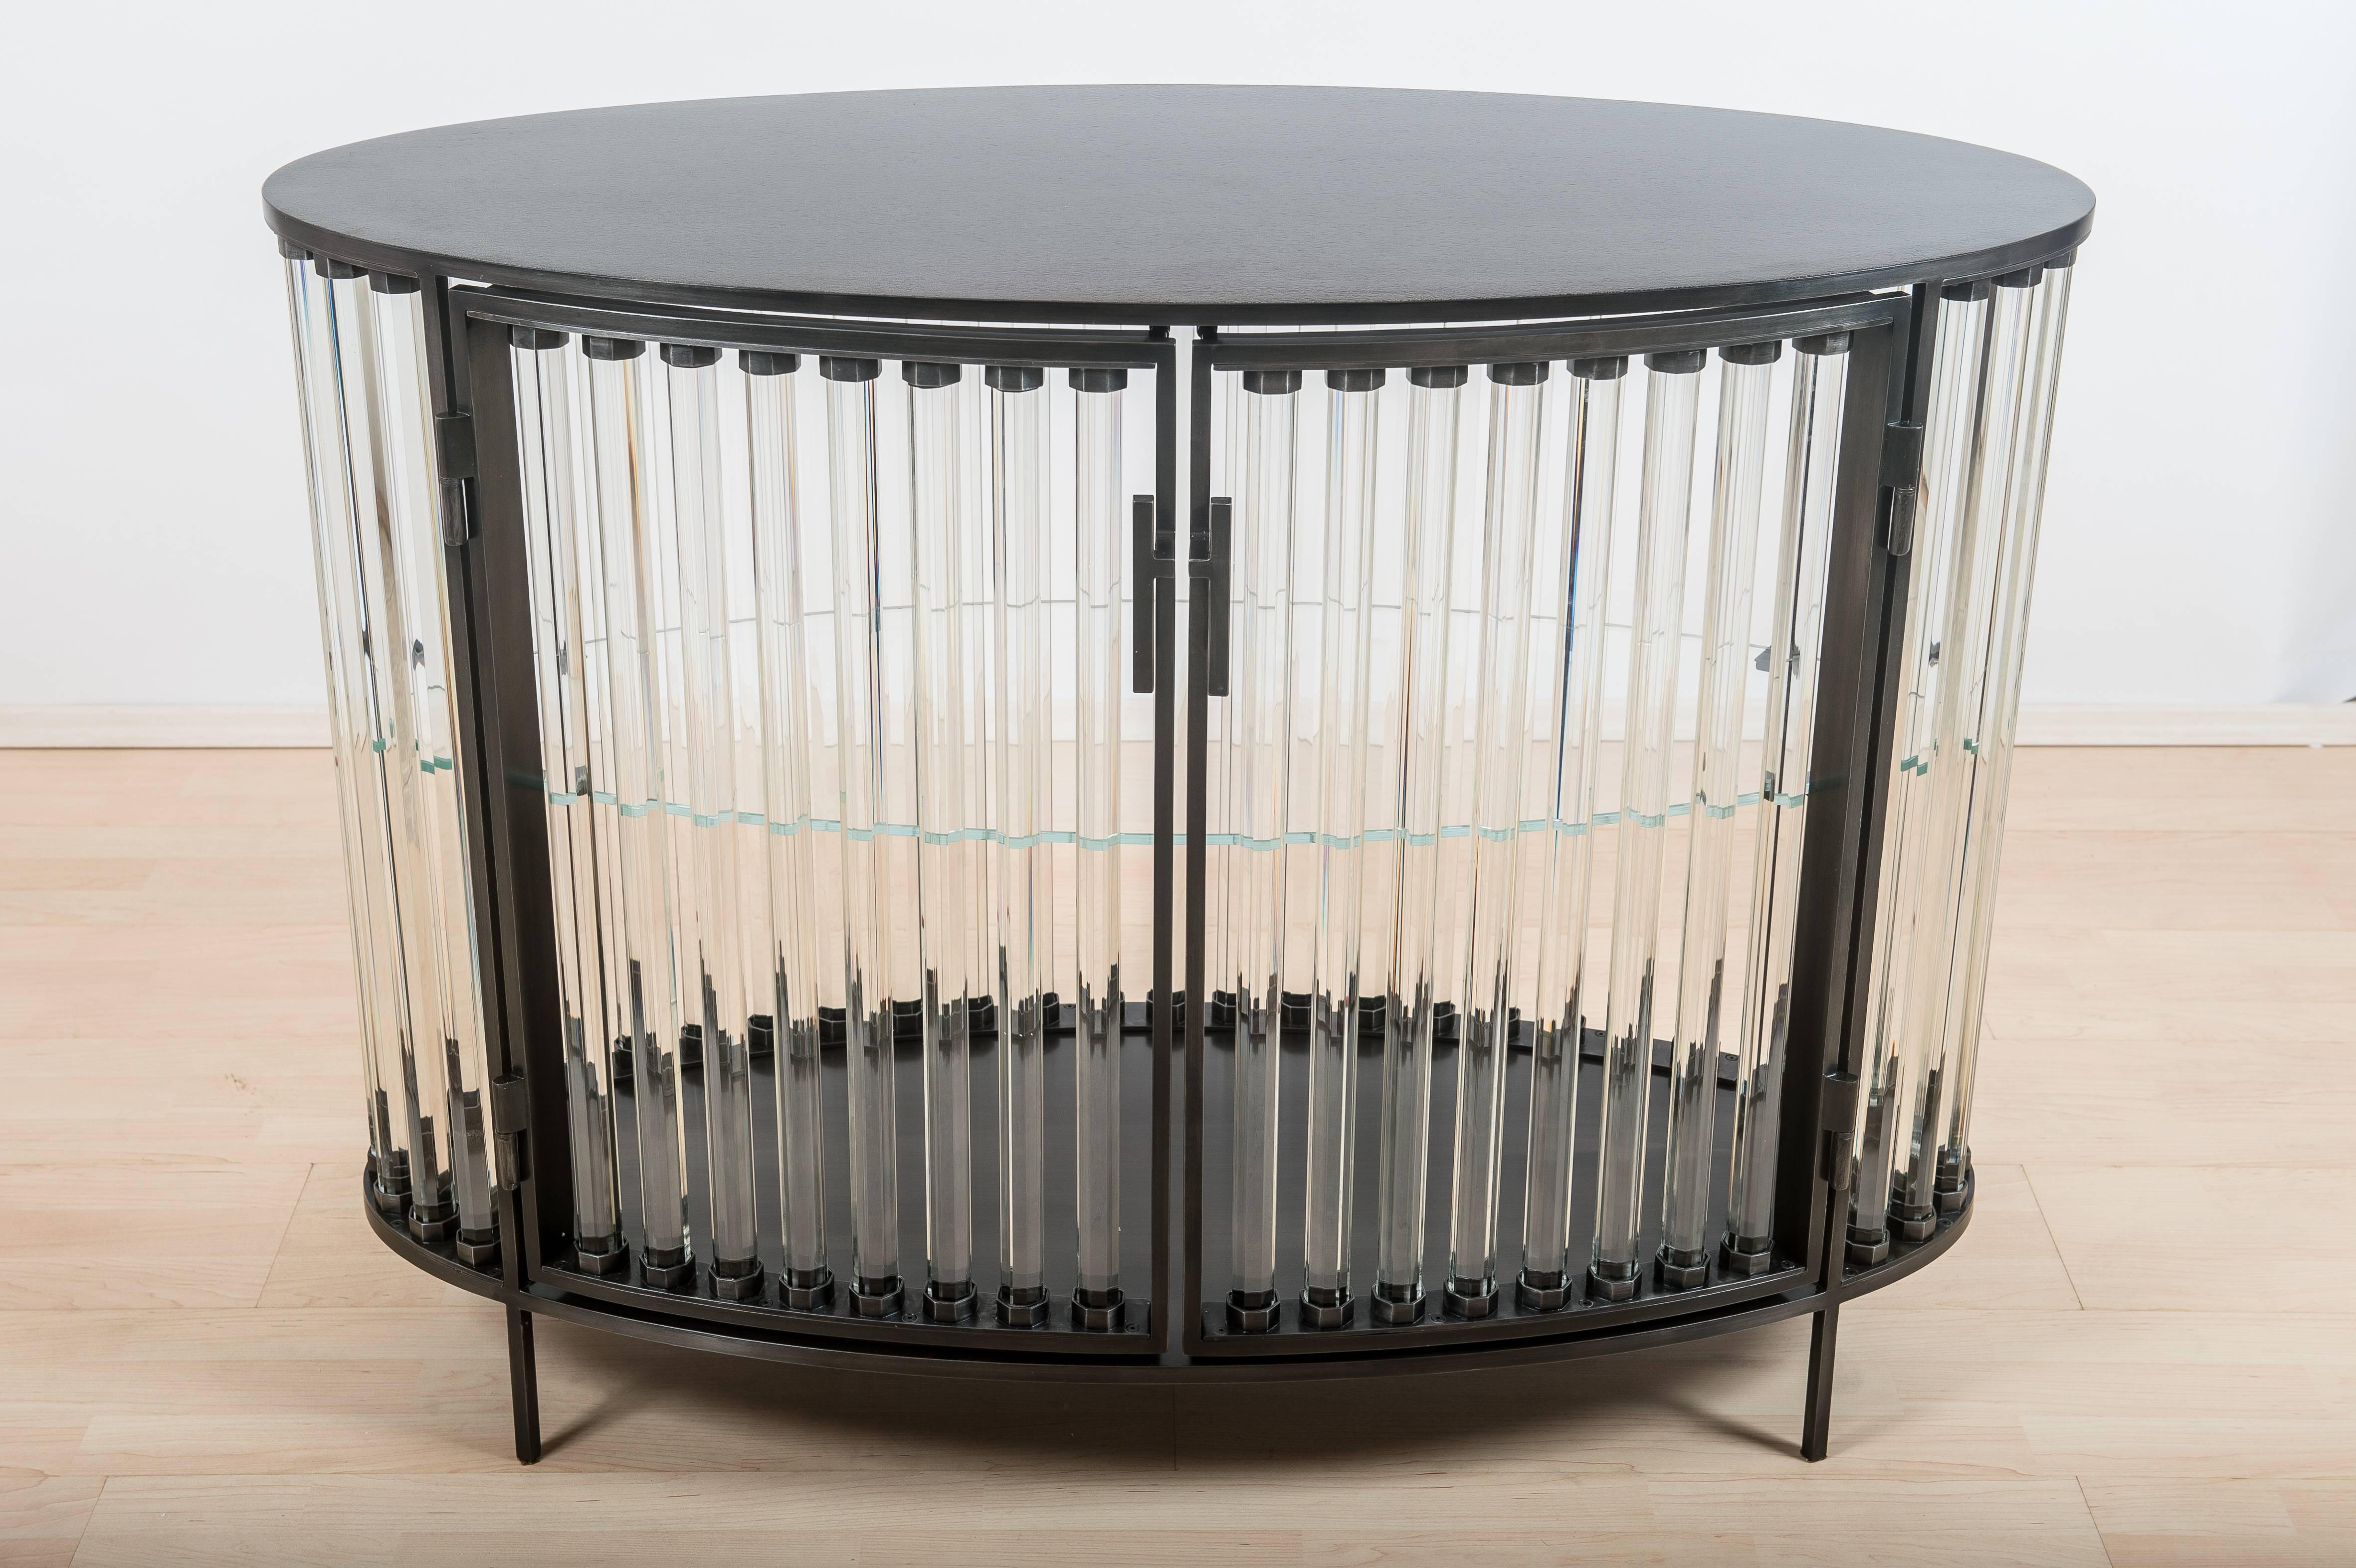 This beautiful cabinet is made of iron and solid glass tubes, and measures 33 7/8” H x 43 3/8” W x 18 ½” D. The oval cabinet is part of Christophe's third solo exhibition at Cristina Grajales Gallery, opening November 2, 2017.

Côme lives and